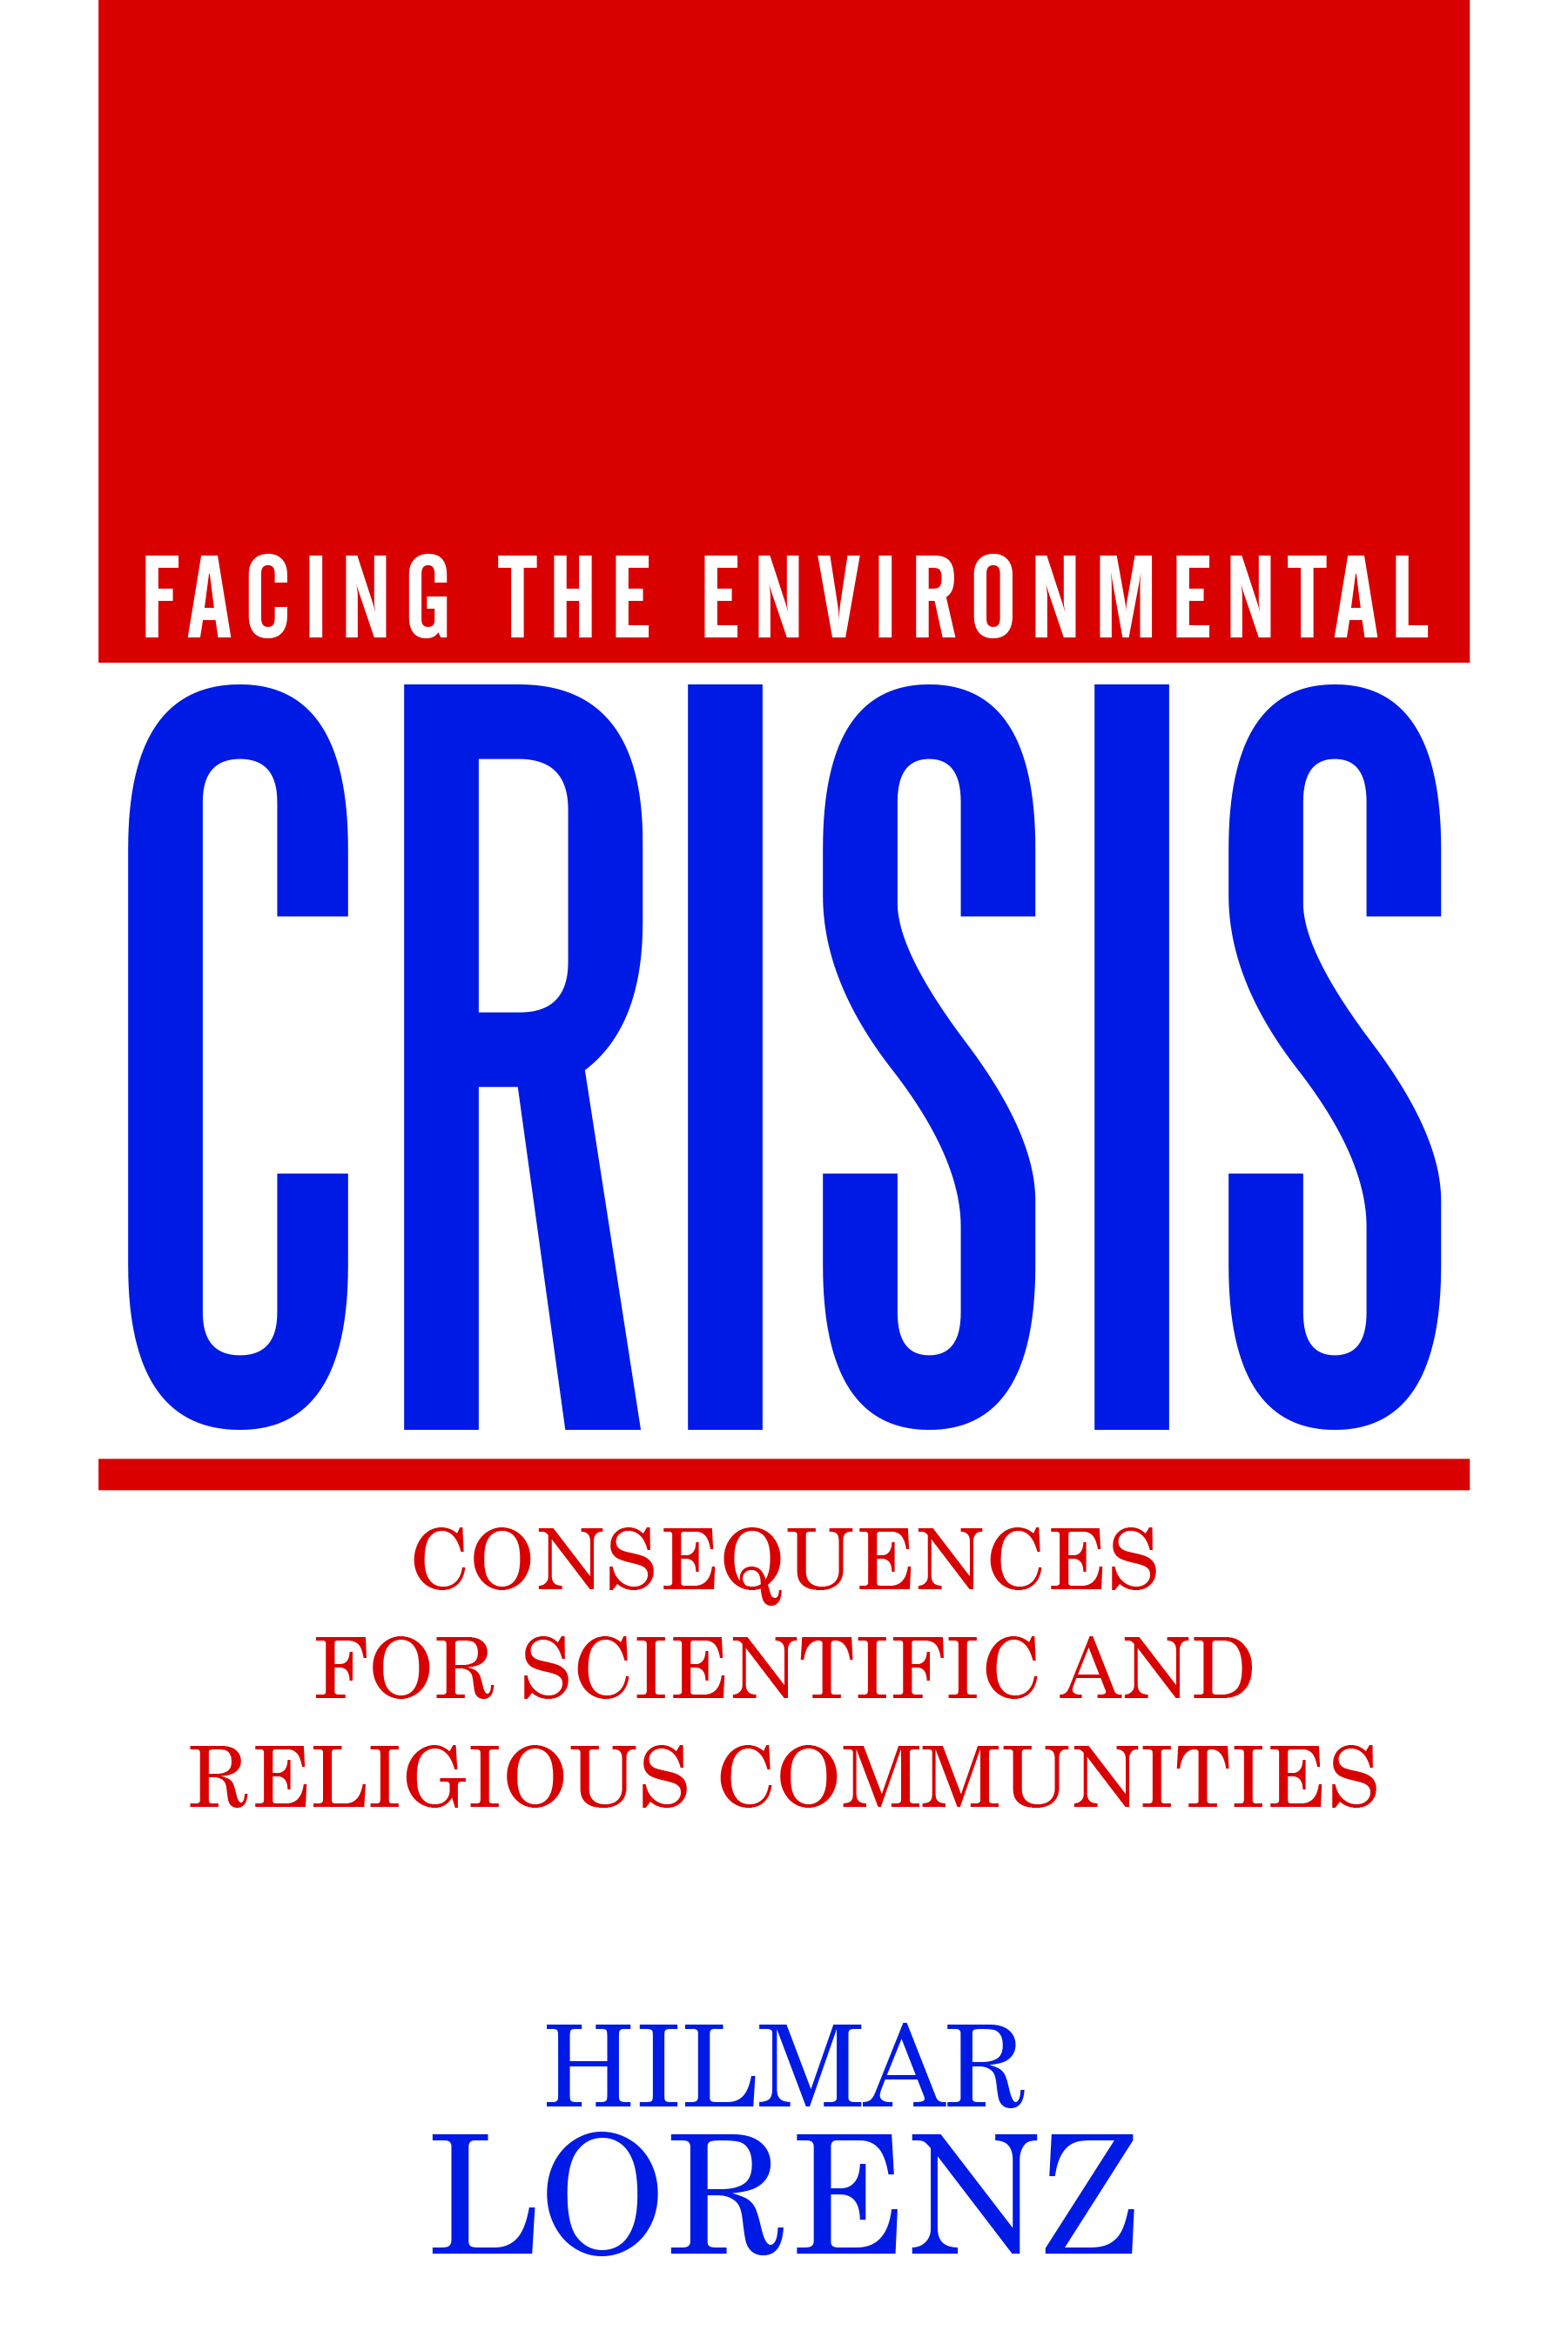 “Facing the Environmental Crisis: Consequences for Scientific and Religious Communities”
By Hilmar Lorenz
